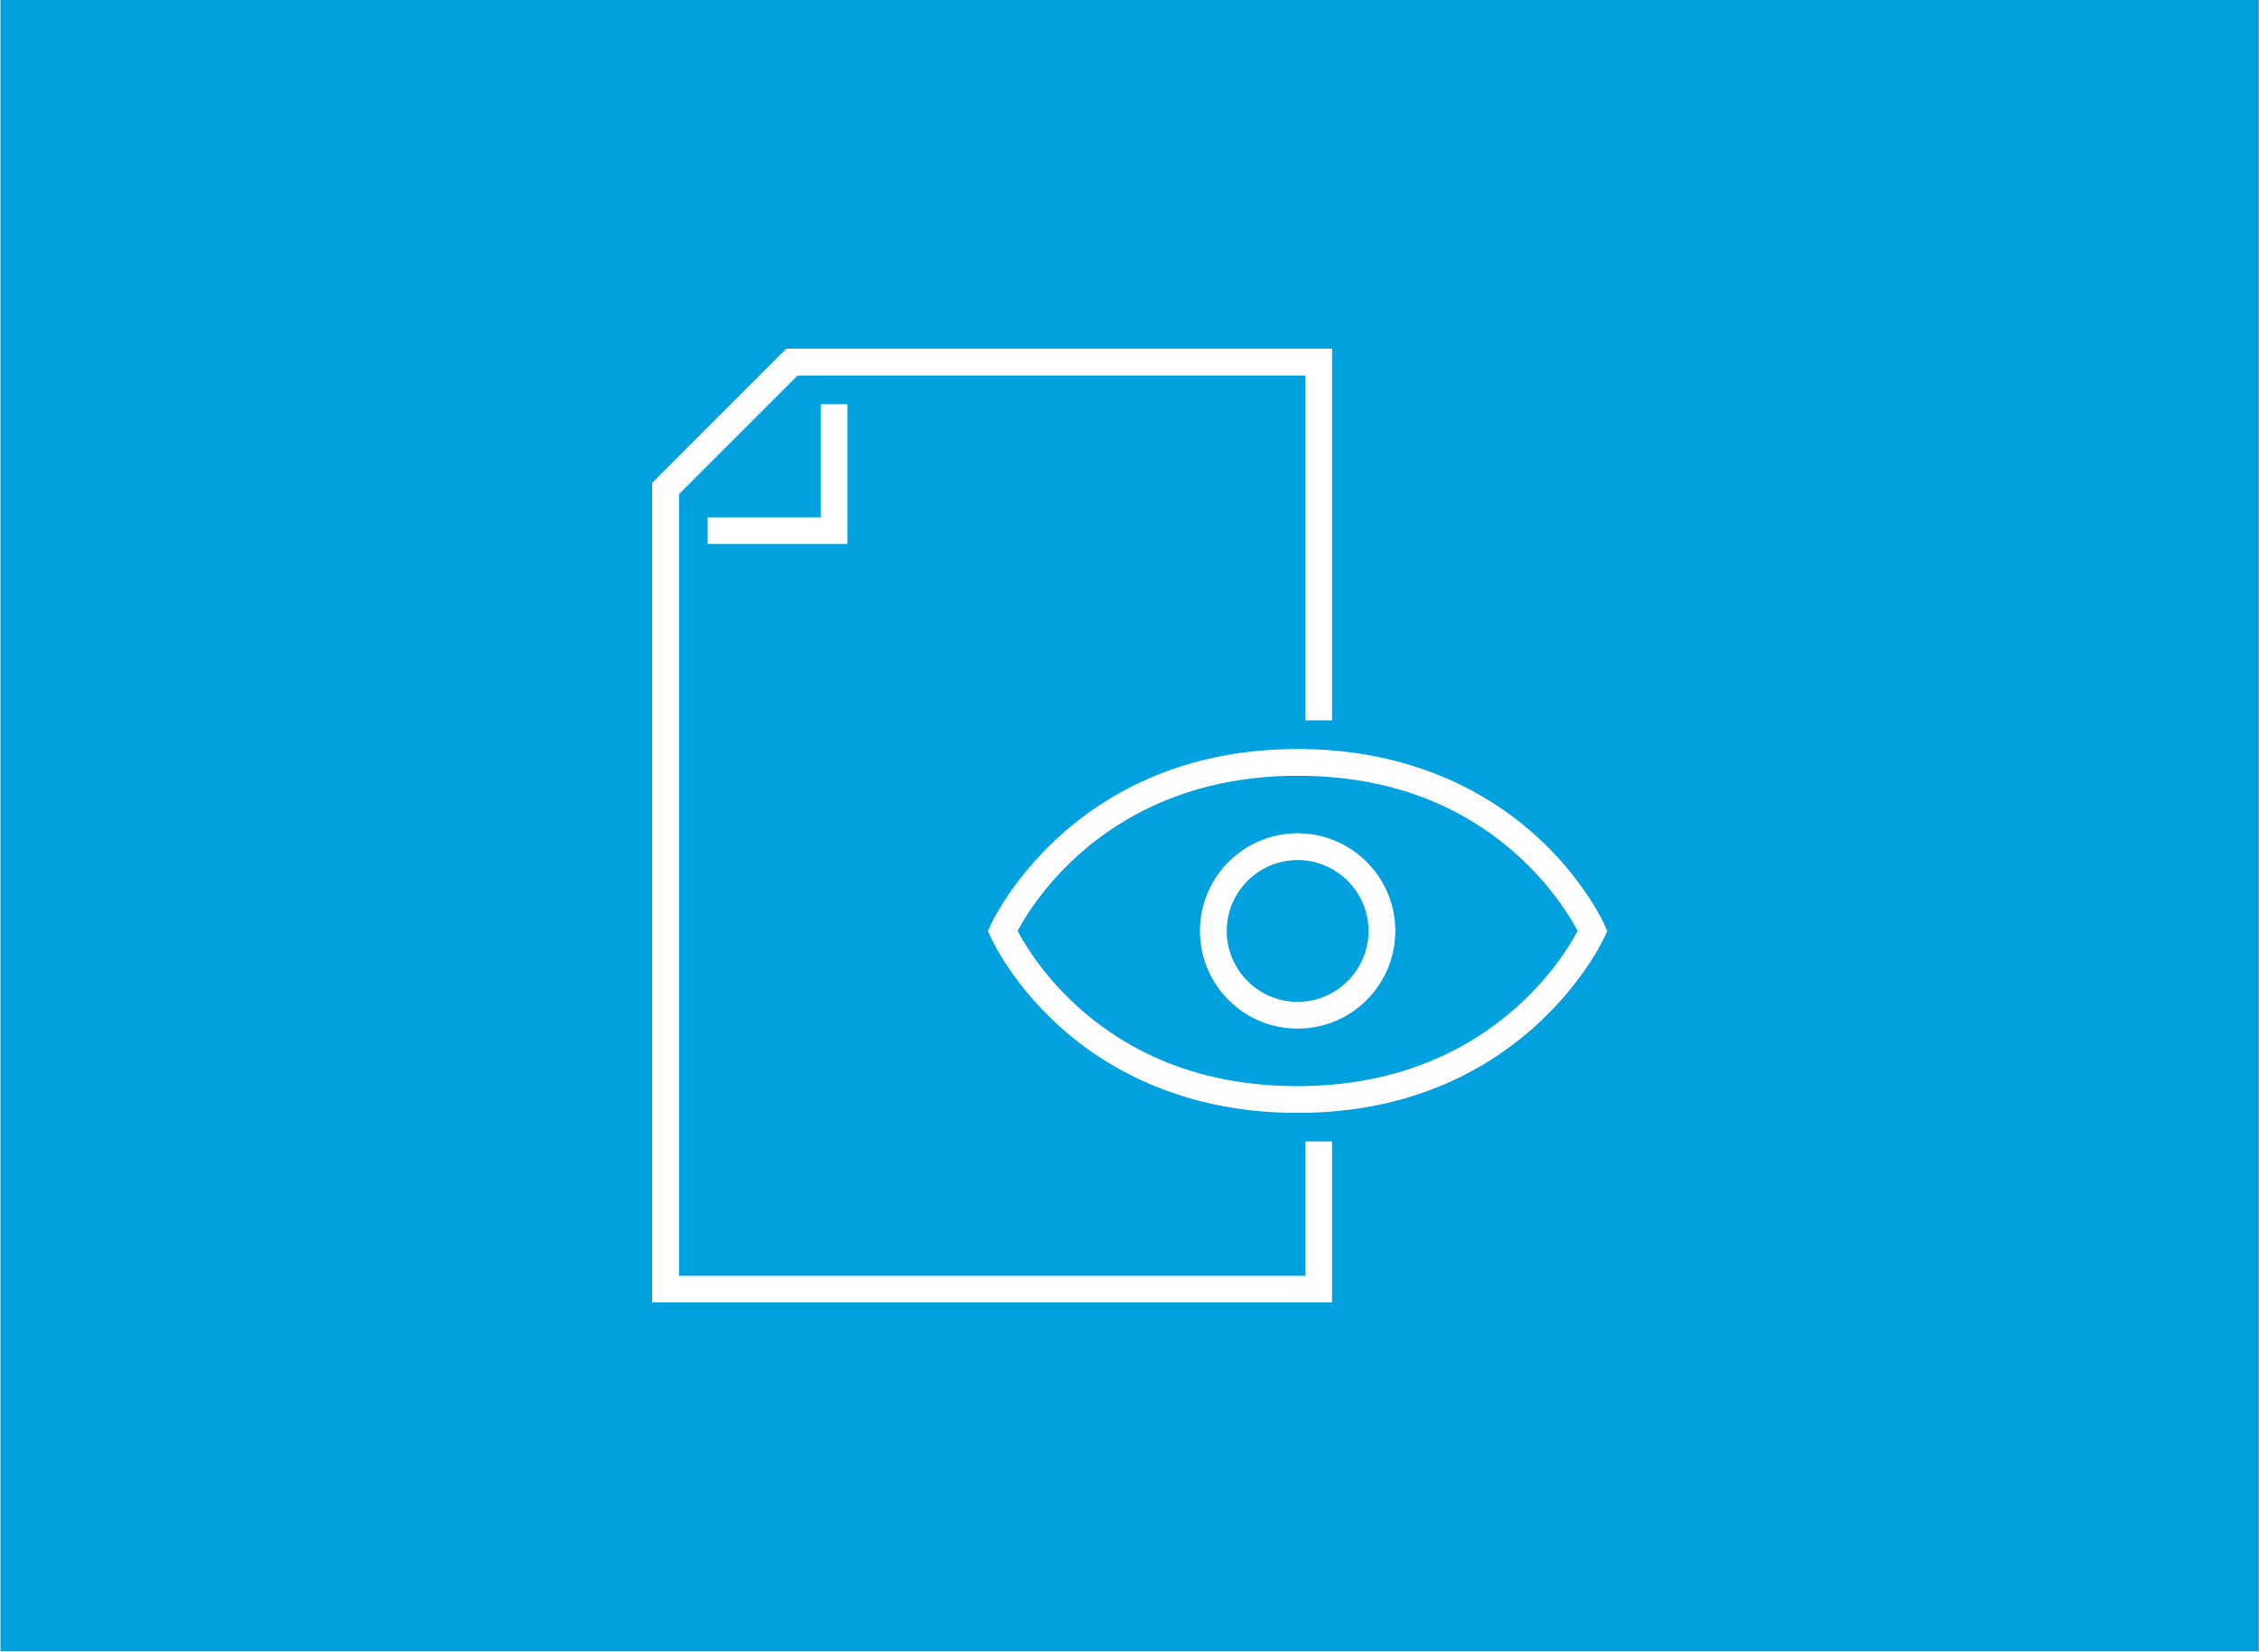 Blue icon of a sheet of paper with an eye